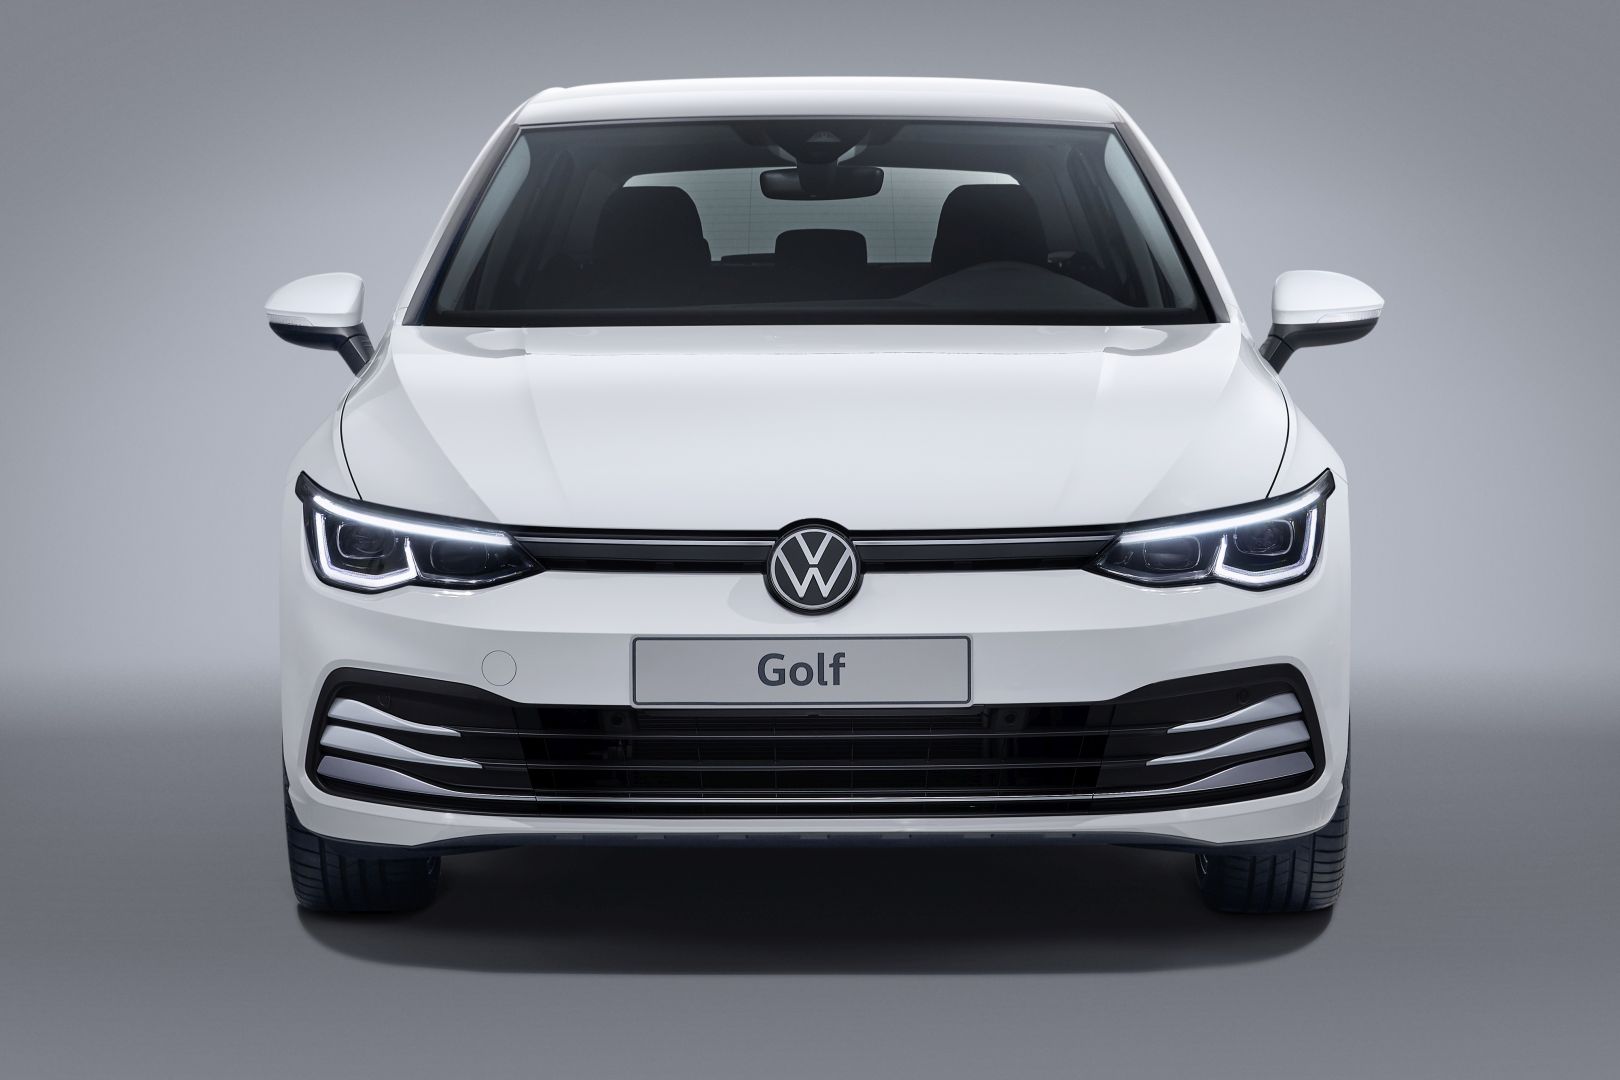 2020 Volkswagen Golf Goes on Sale, Priced from EUR27,510 - autoevolution